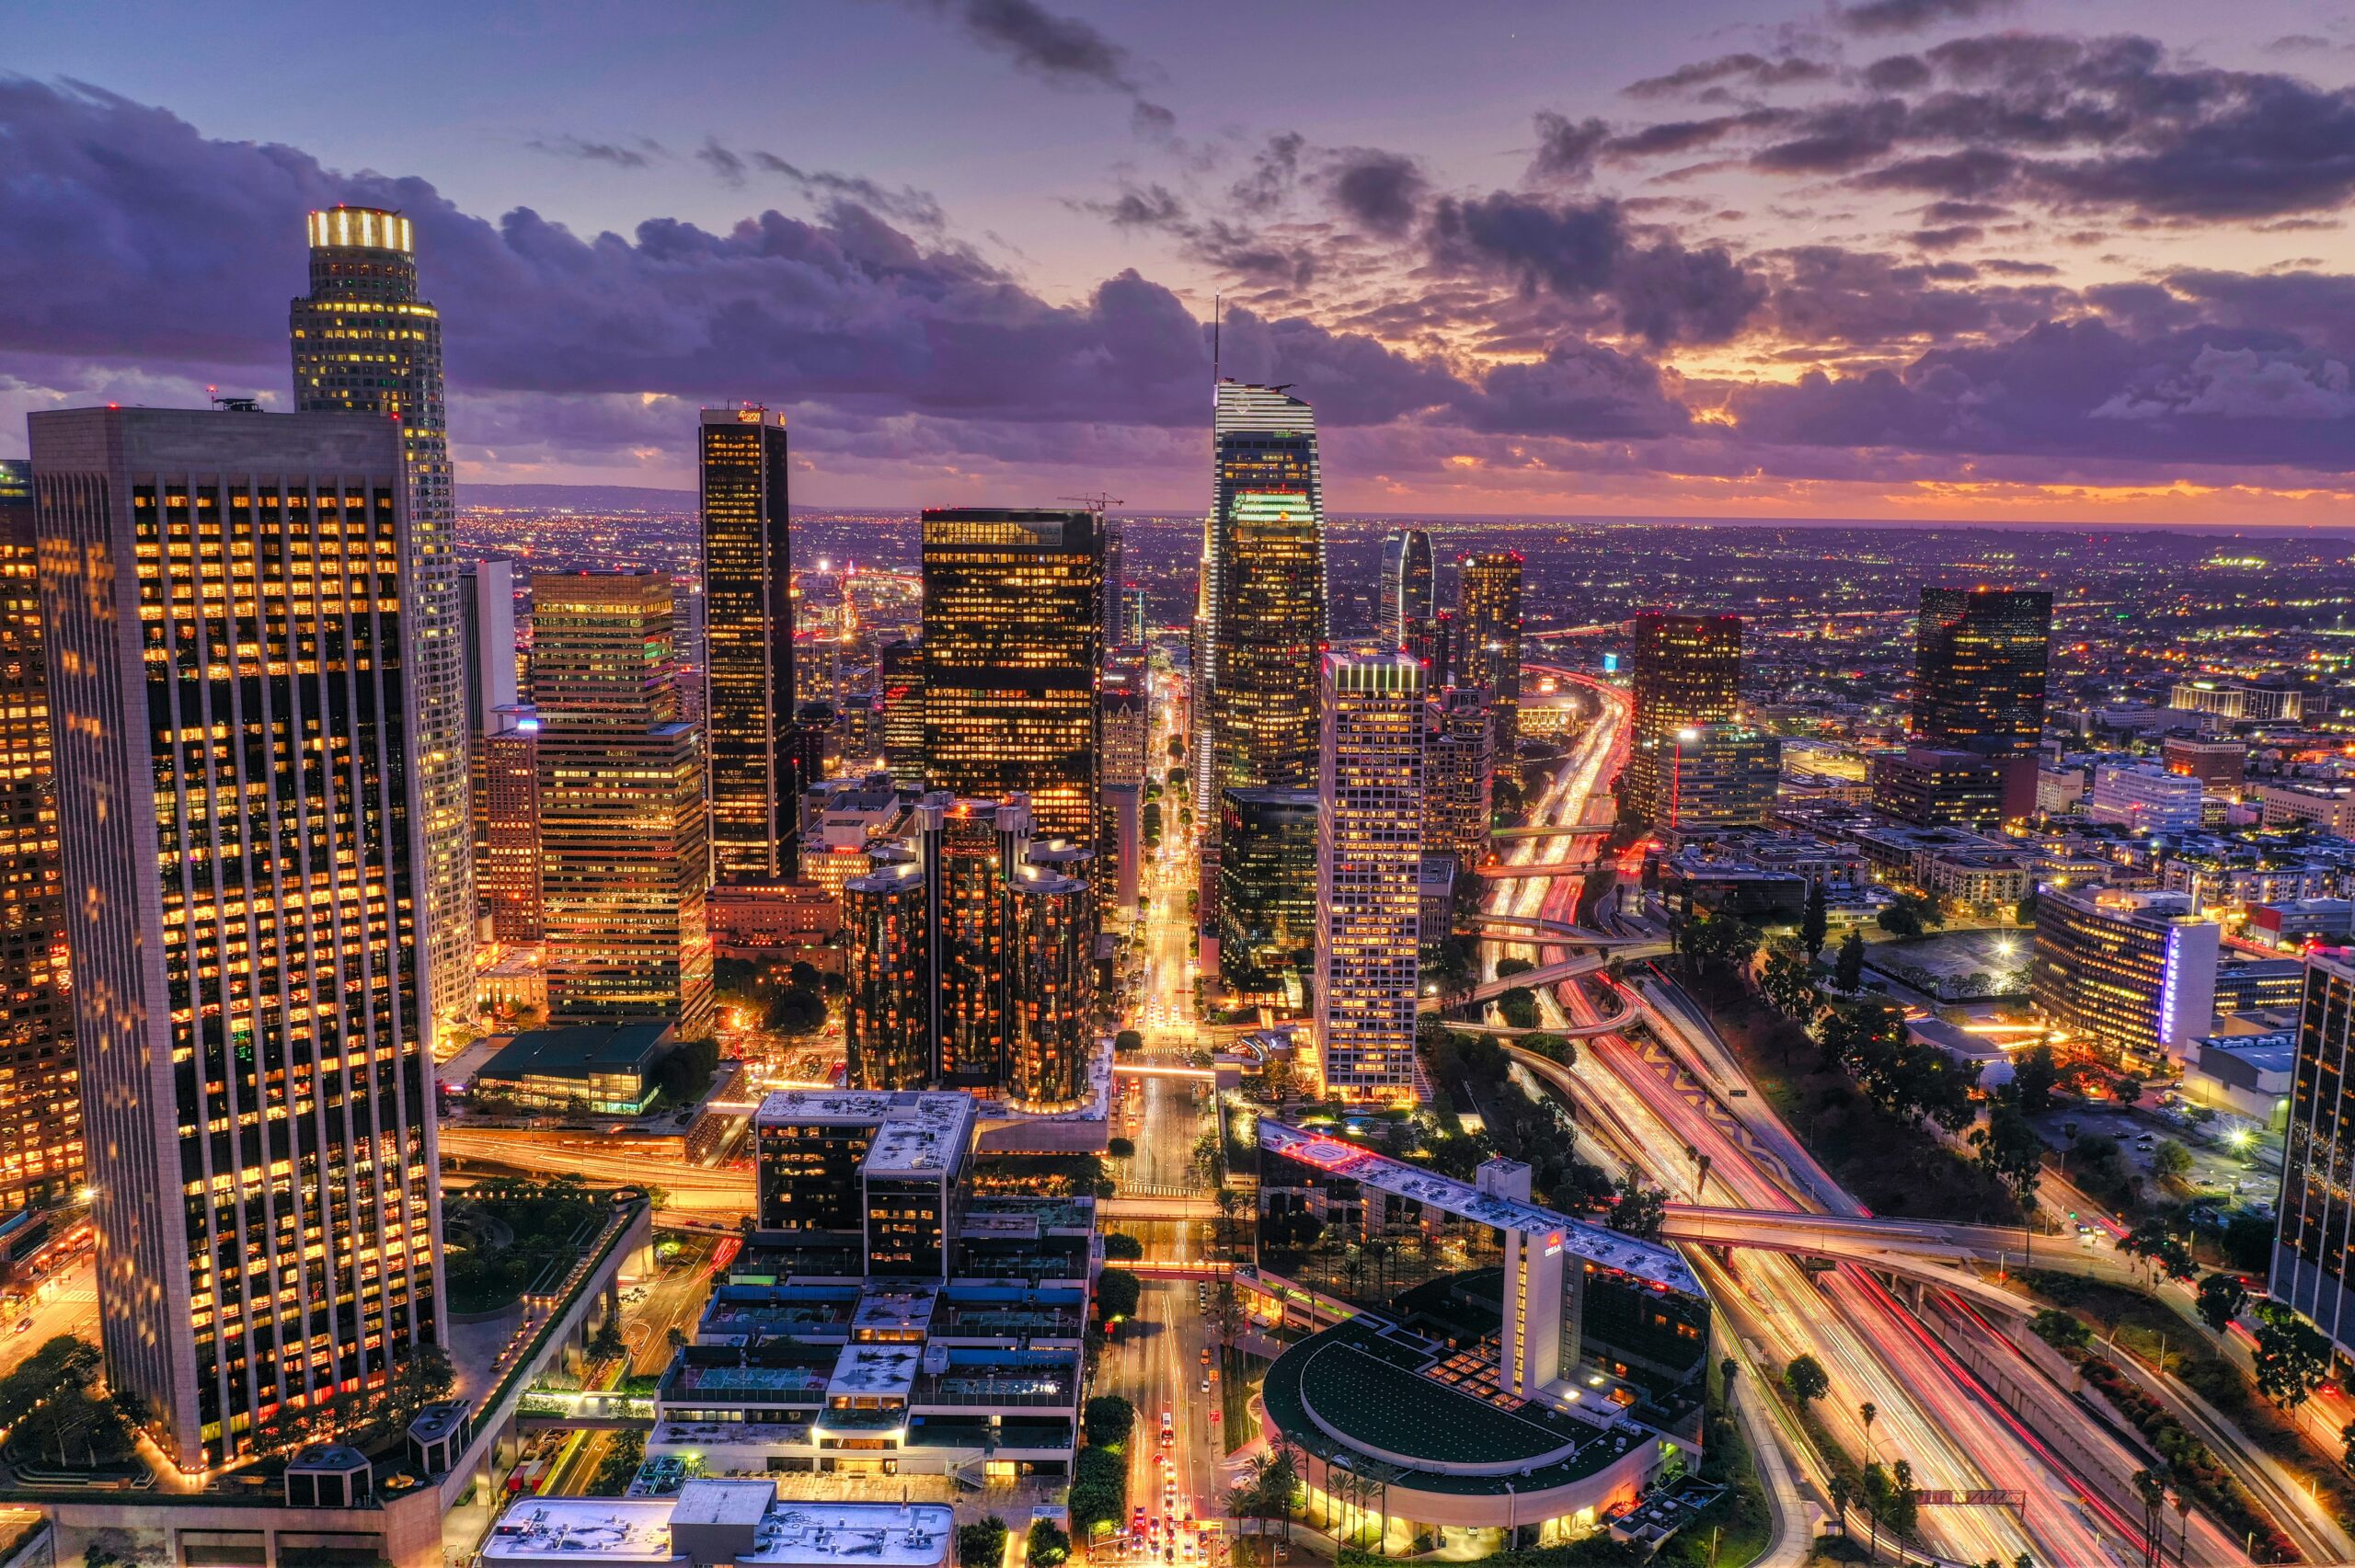 Los Angeles is the second largest city in the United States and one of the best places to live in California. Pictured: A sky view of Los Angeles